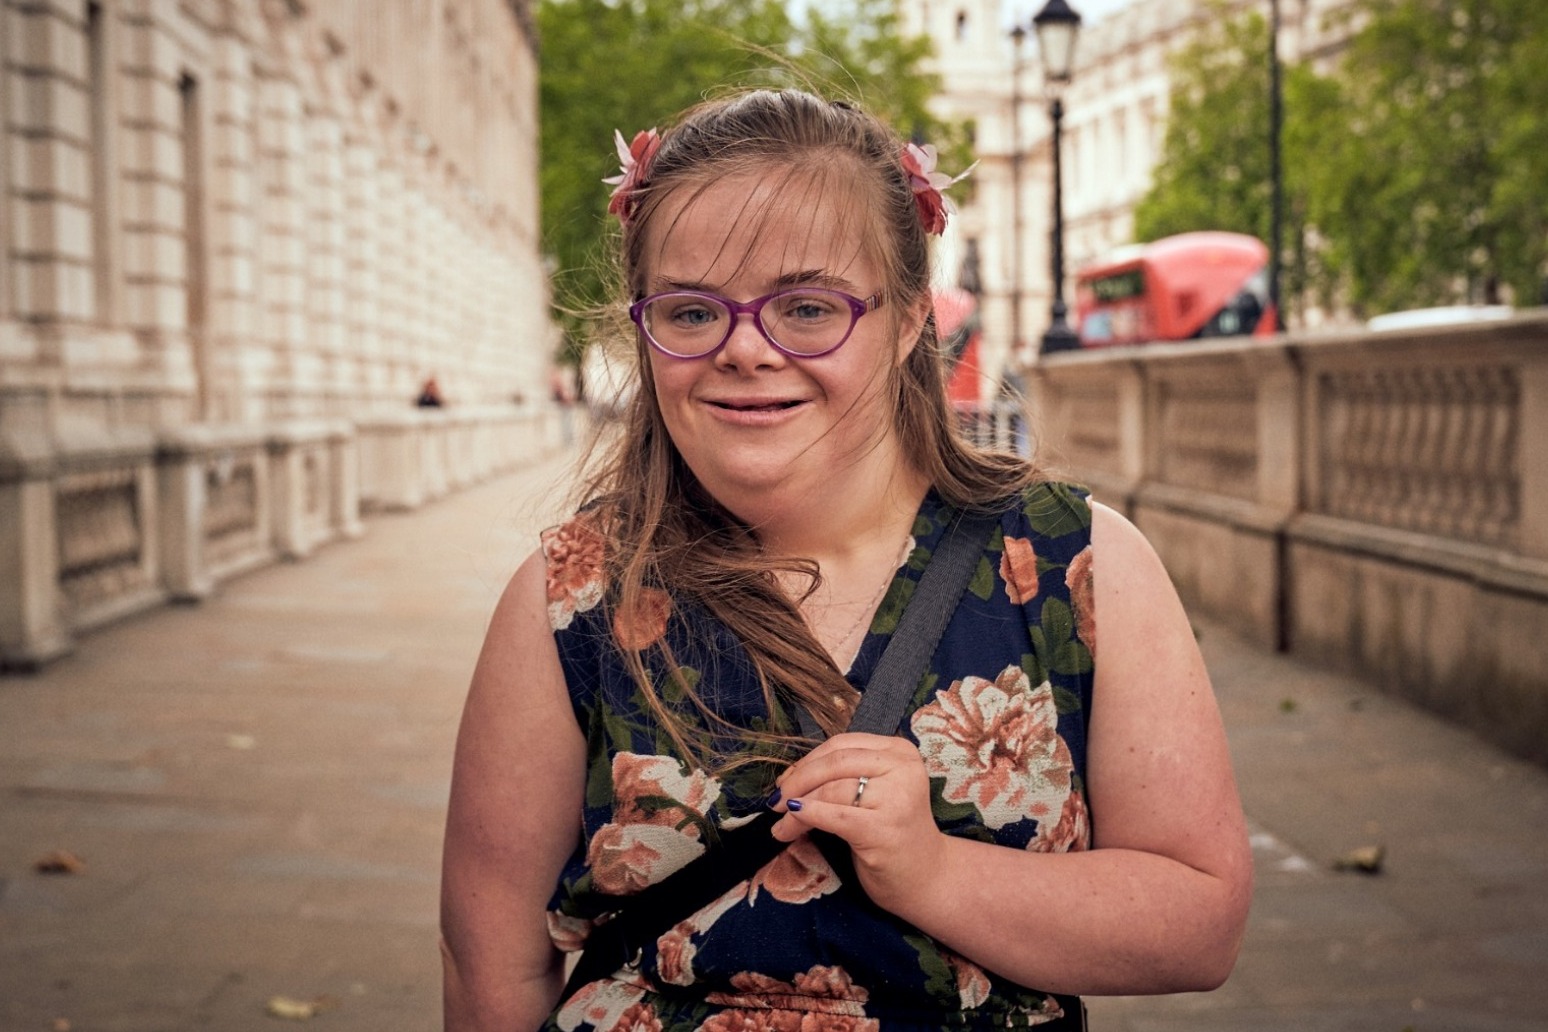 Ruling due in High Court challenge over Down’s syndrome abortion law 